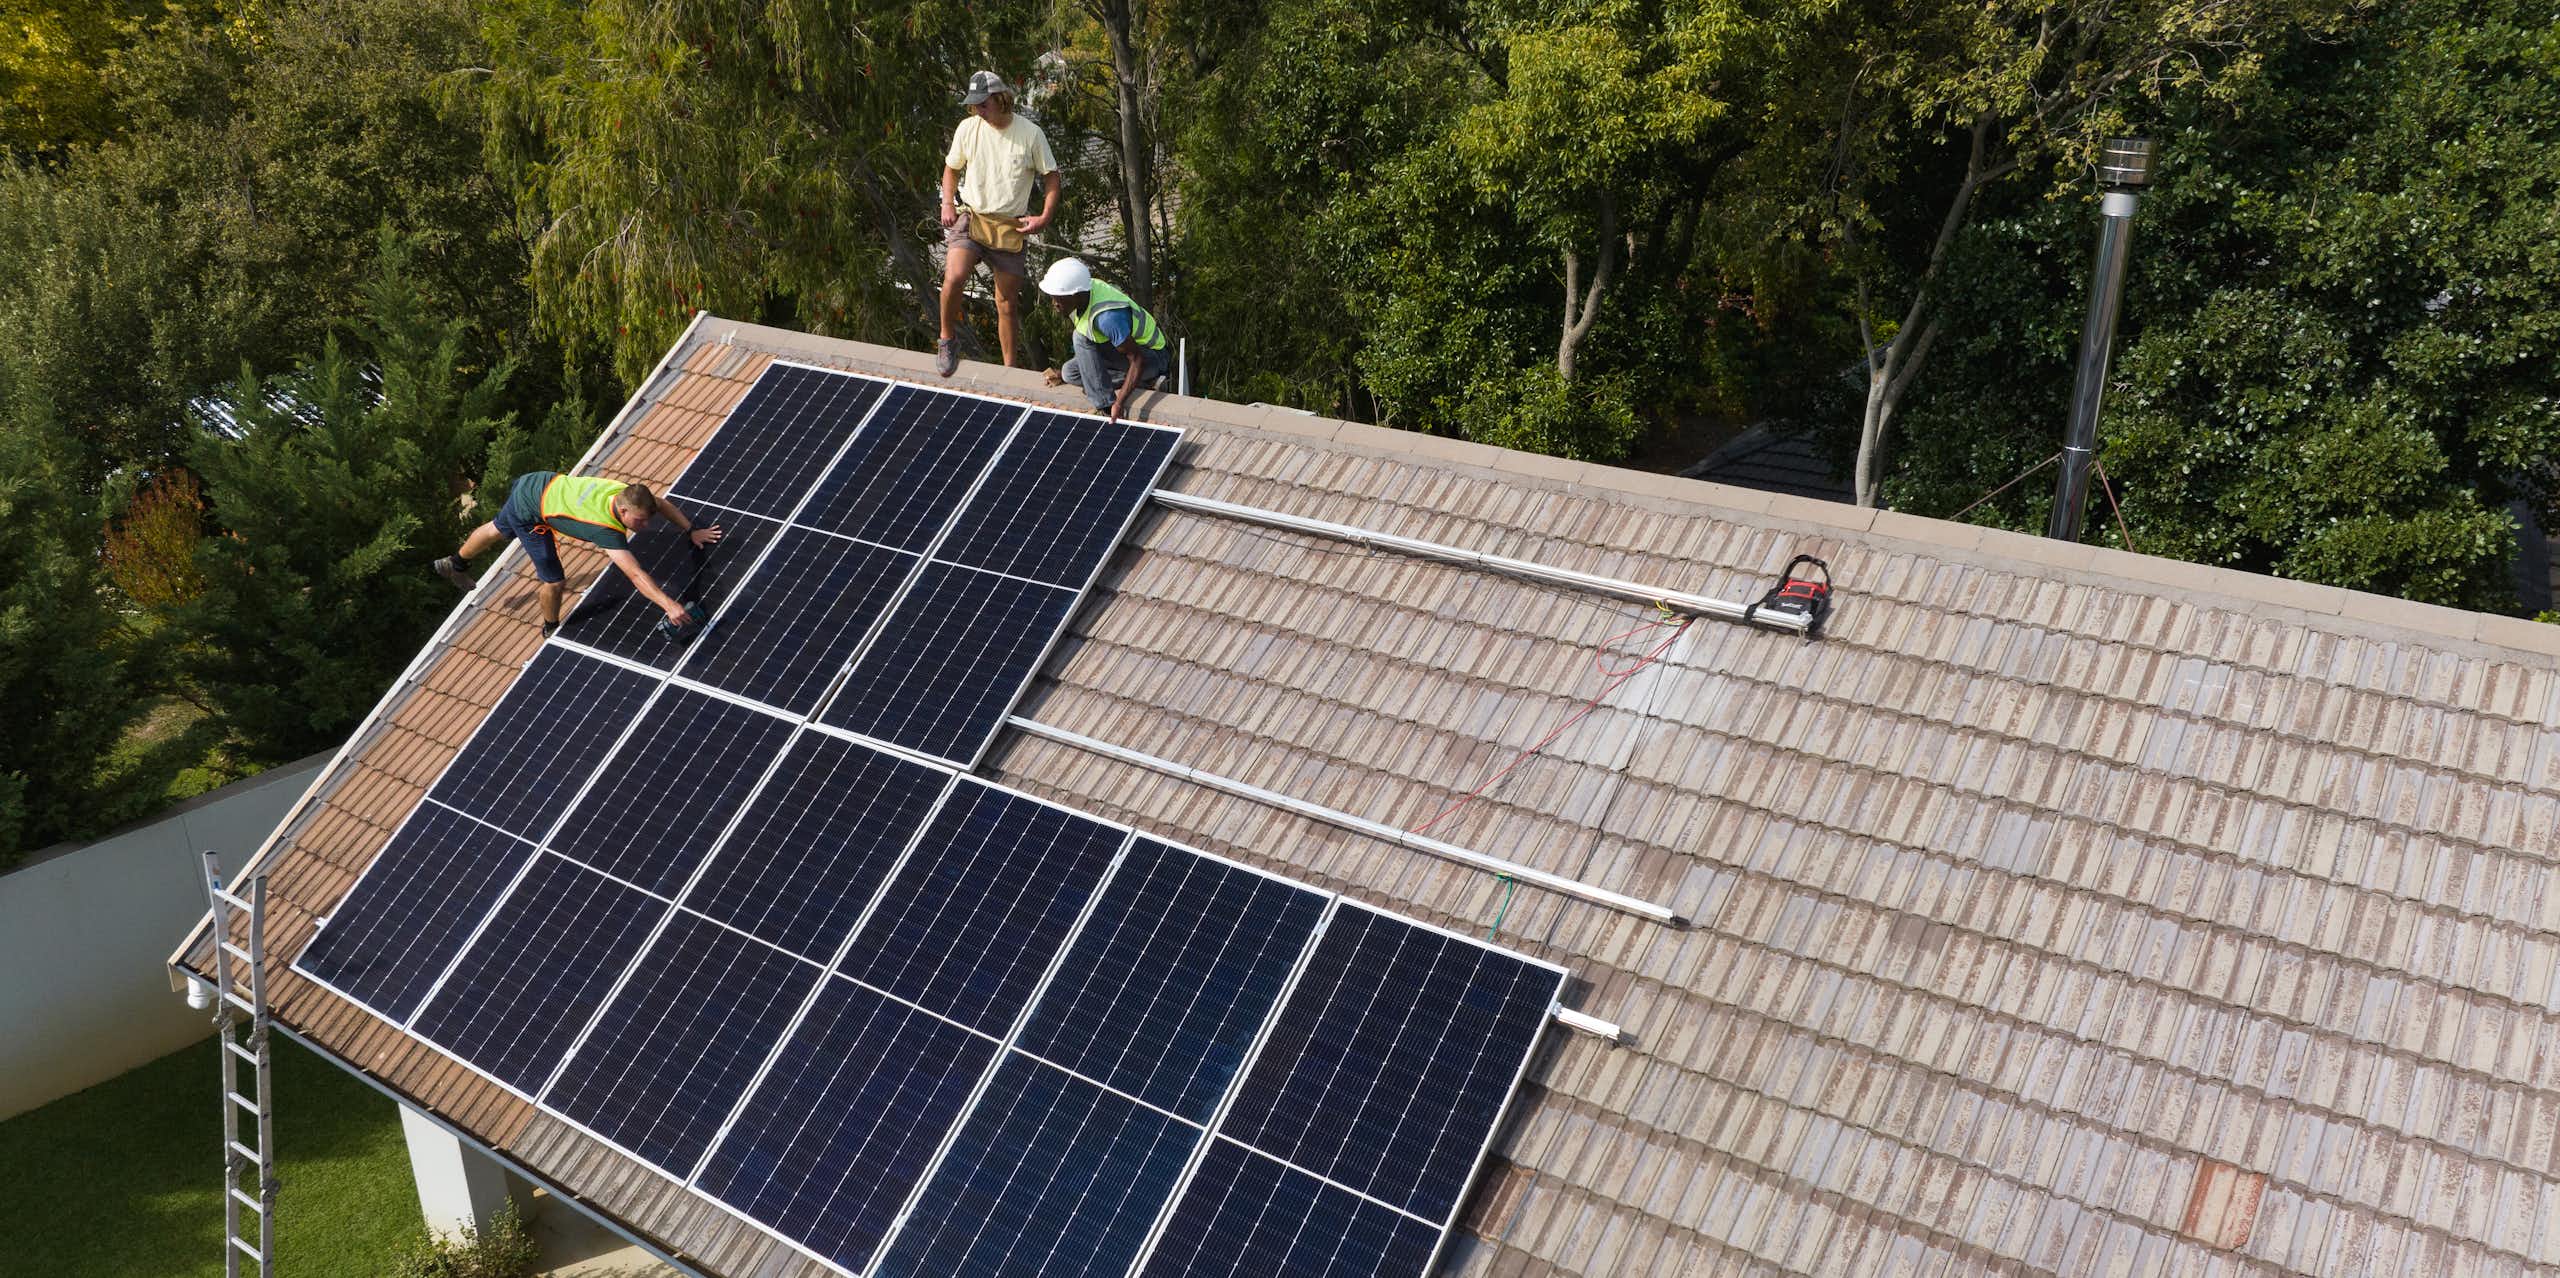 Three men on a roof are fitting solar panels